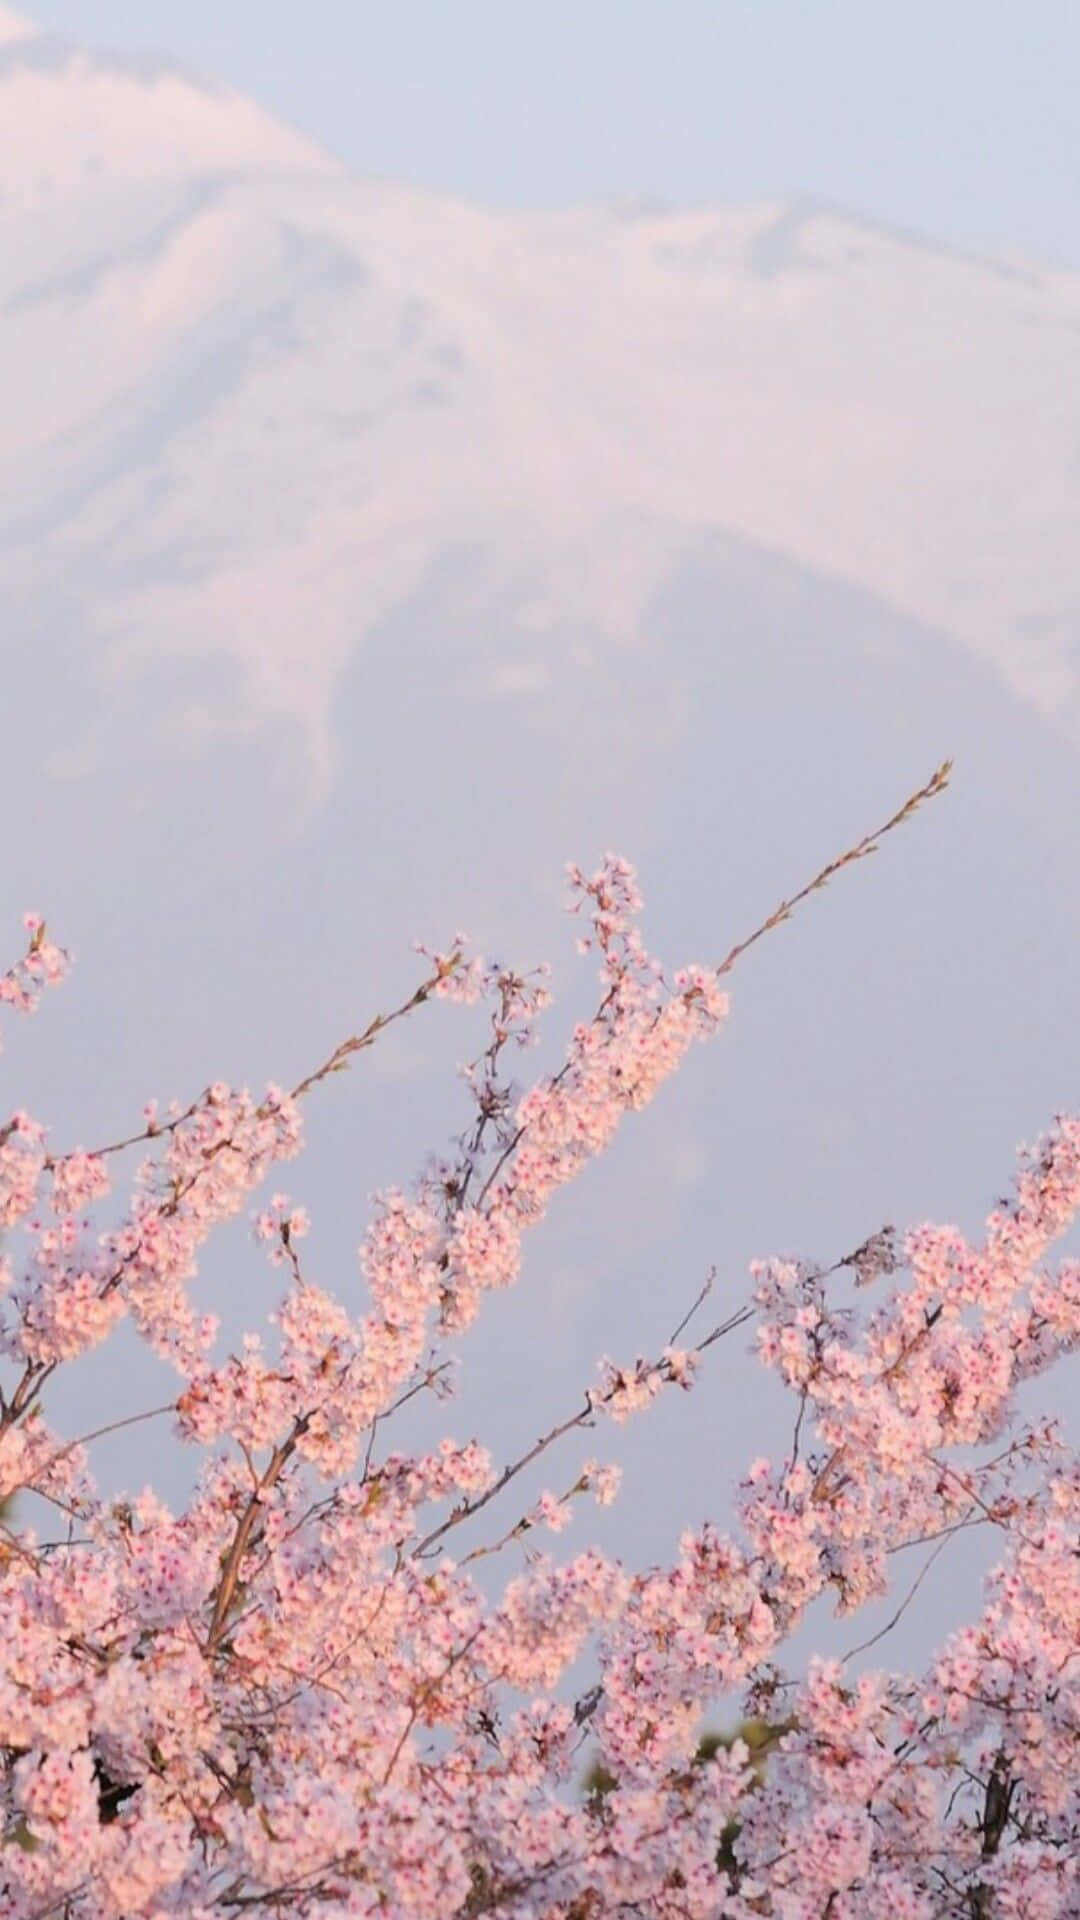 Ethereal Mountain Cherry Blossoms Wallpaper